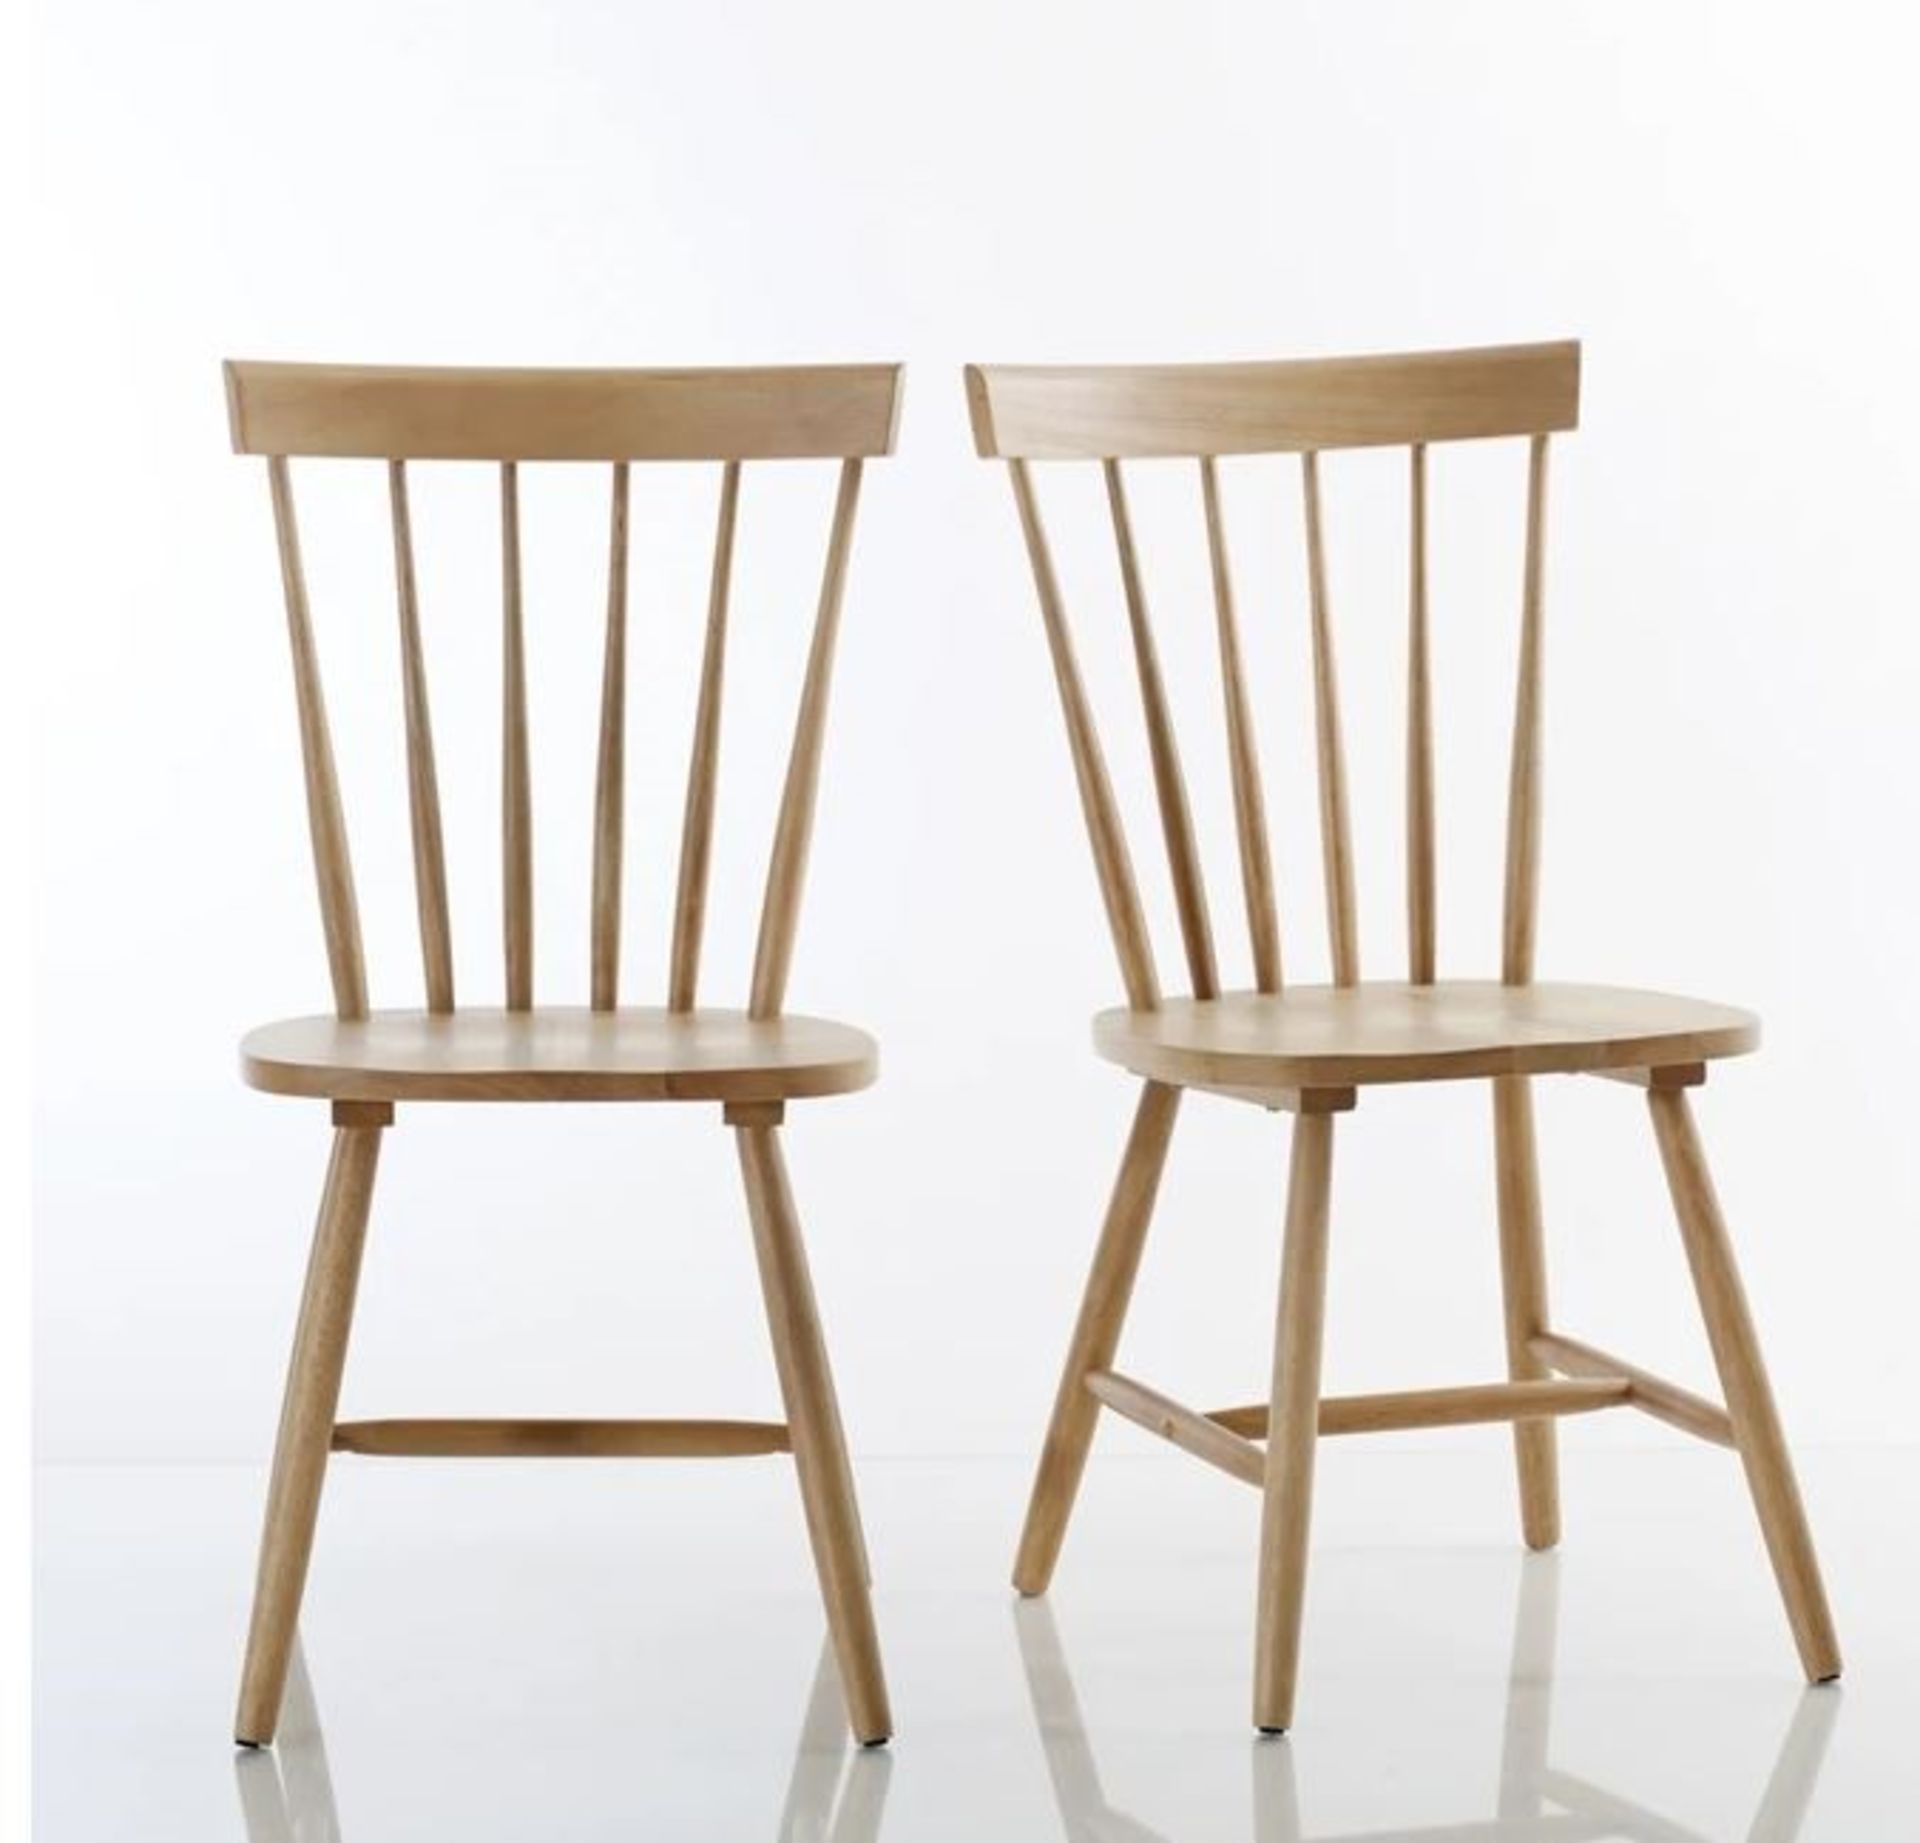 LA REDOUTE JIMI SOLID WOOD LADDER-BACK CHAIRS (SET OF 2)